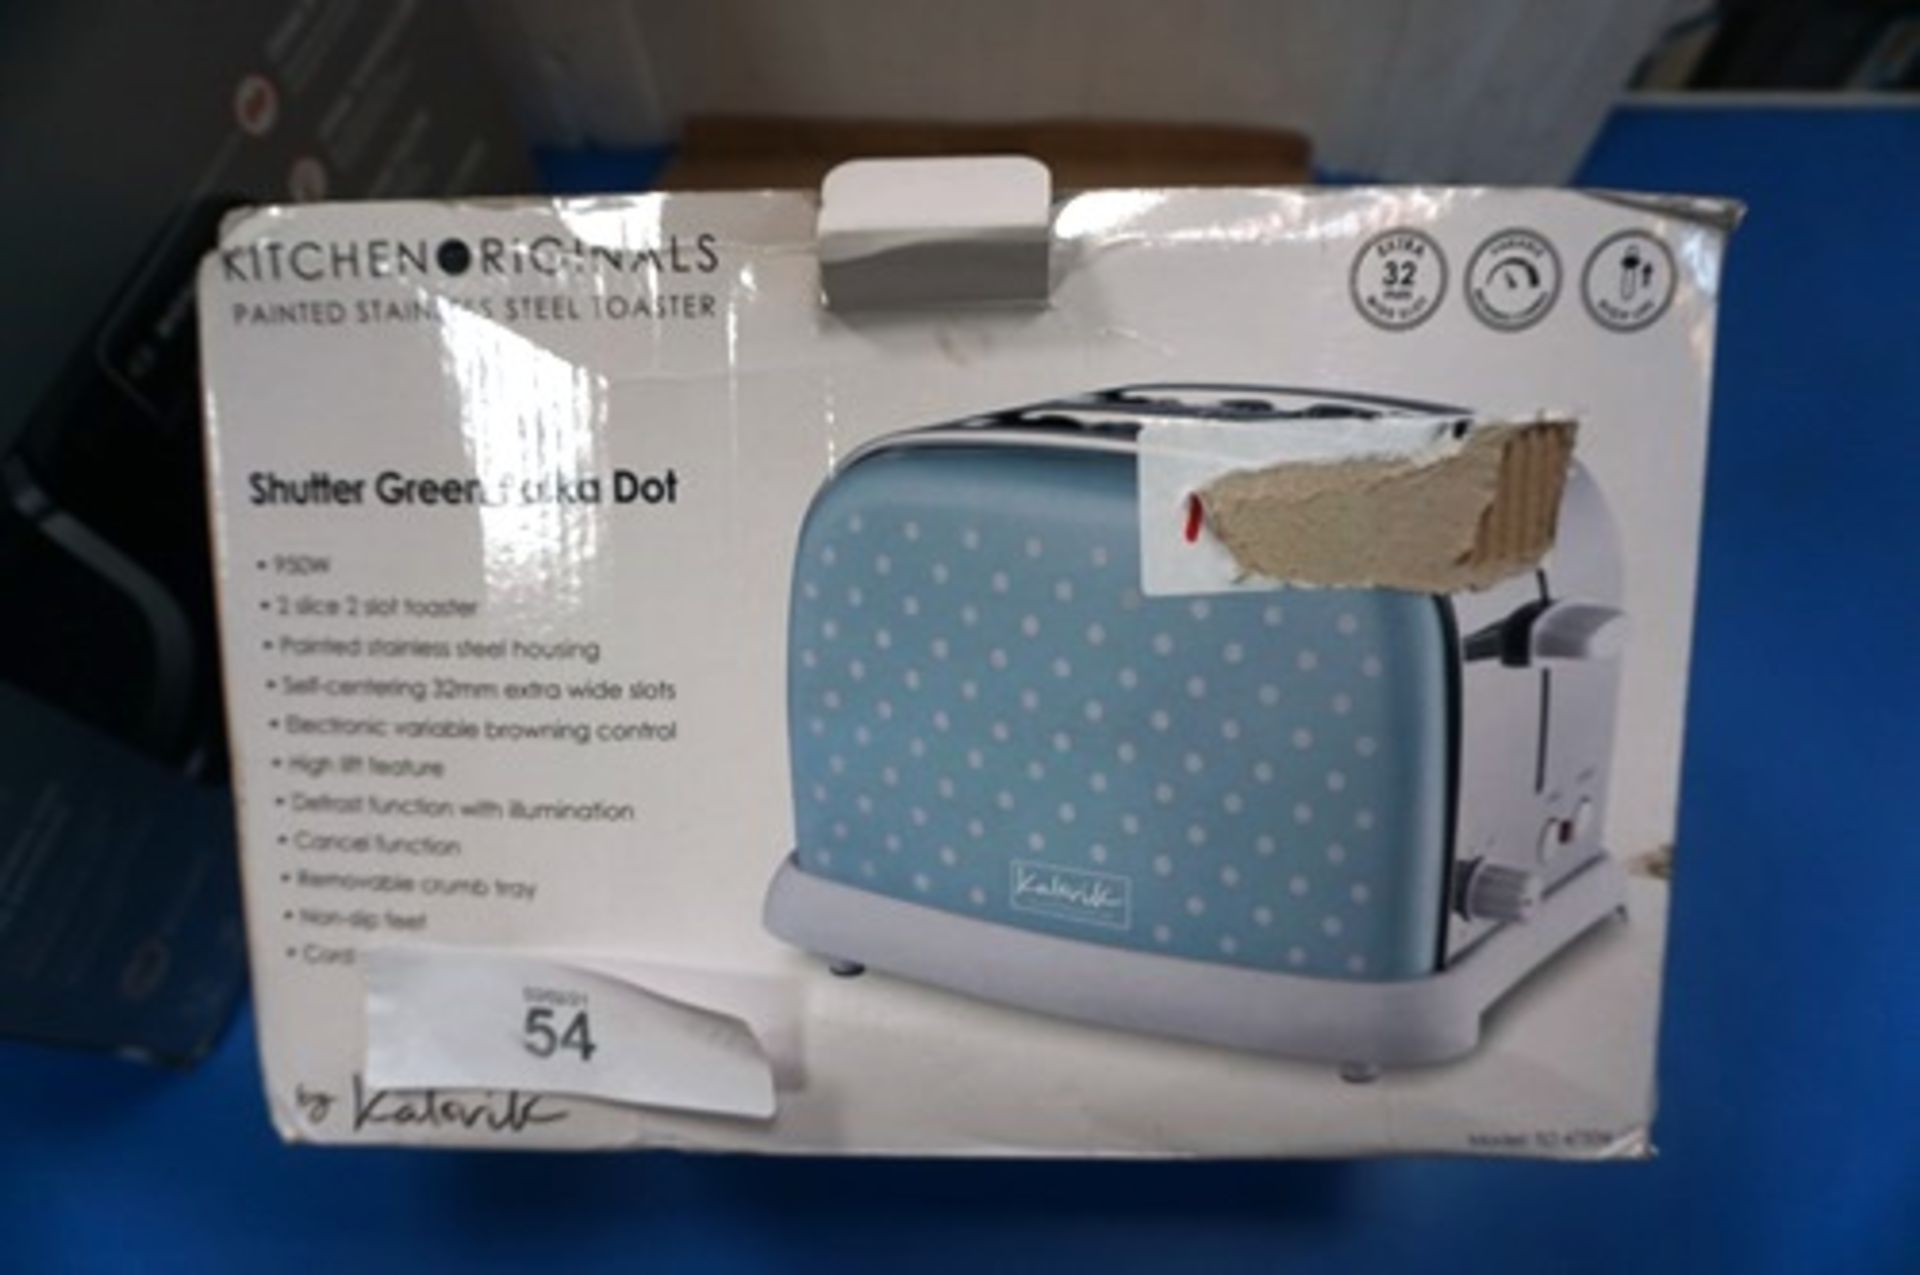 A Tassimo coffee machine, model TAS6002GB together with Polka Dot green 2 slice toaster, model 47334 - Image 3 of 3